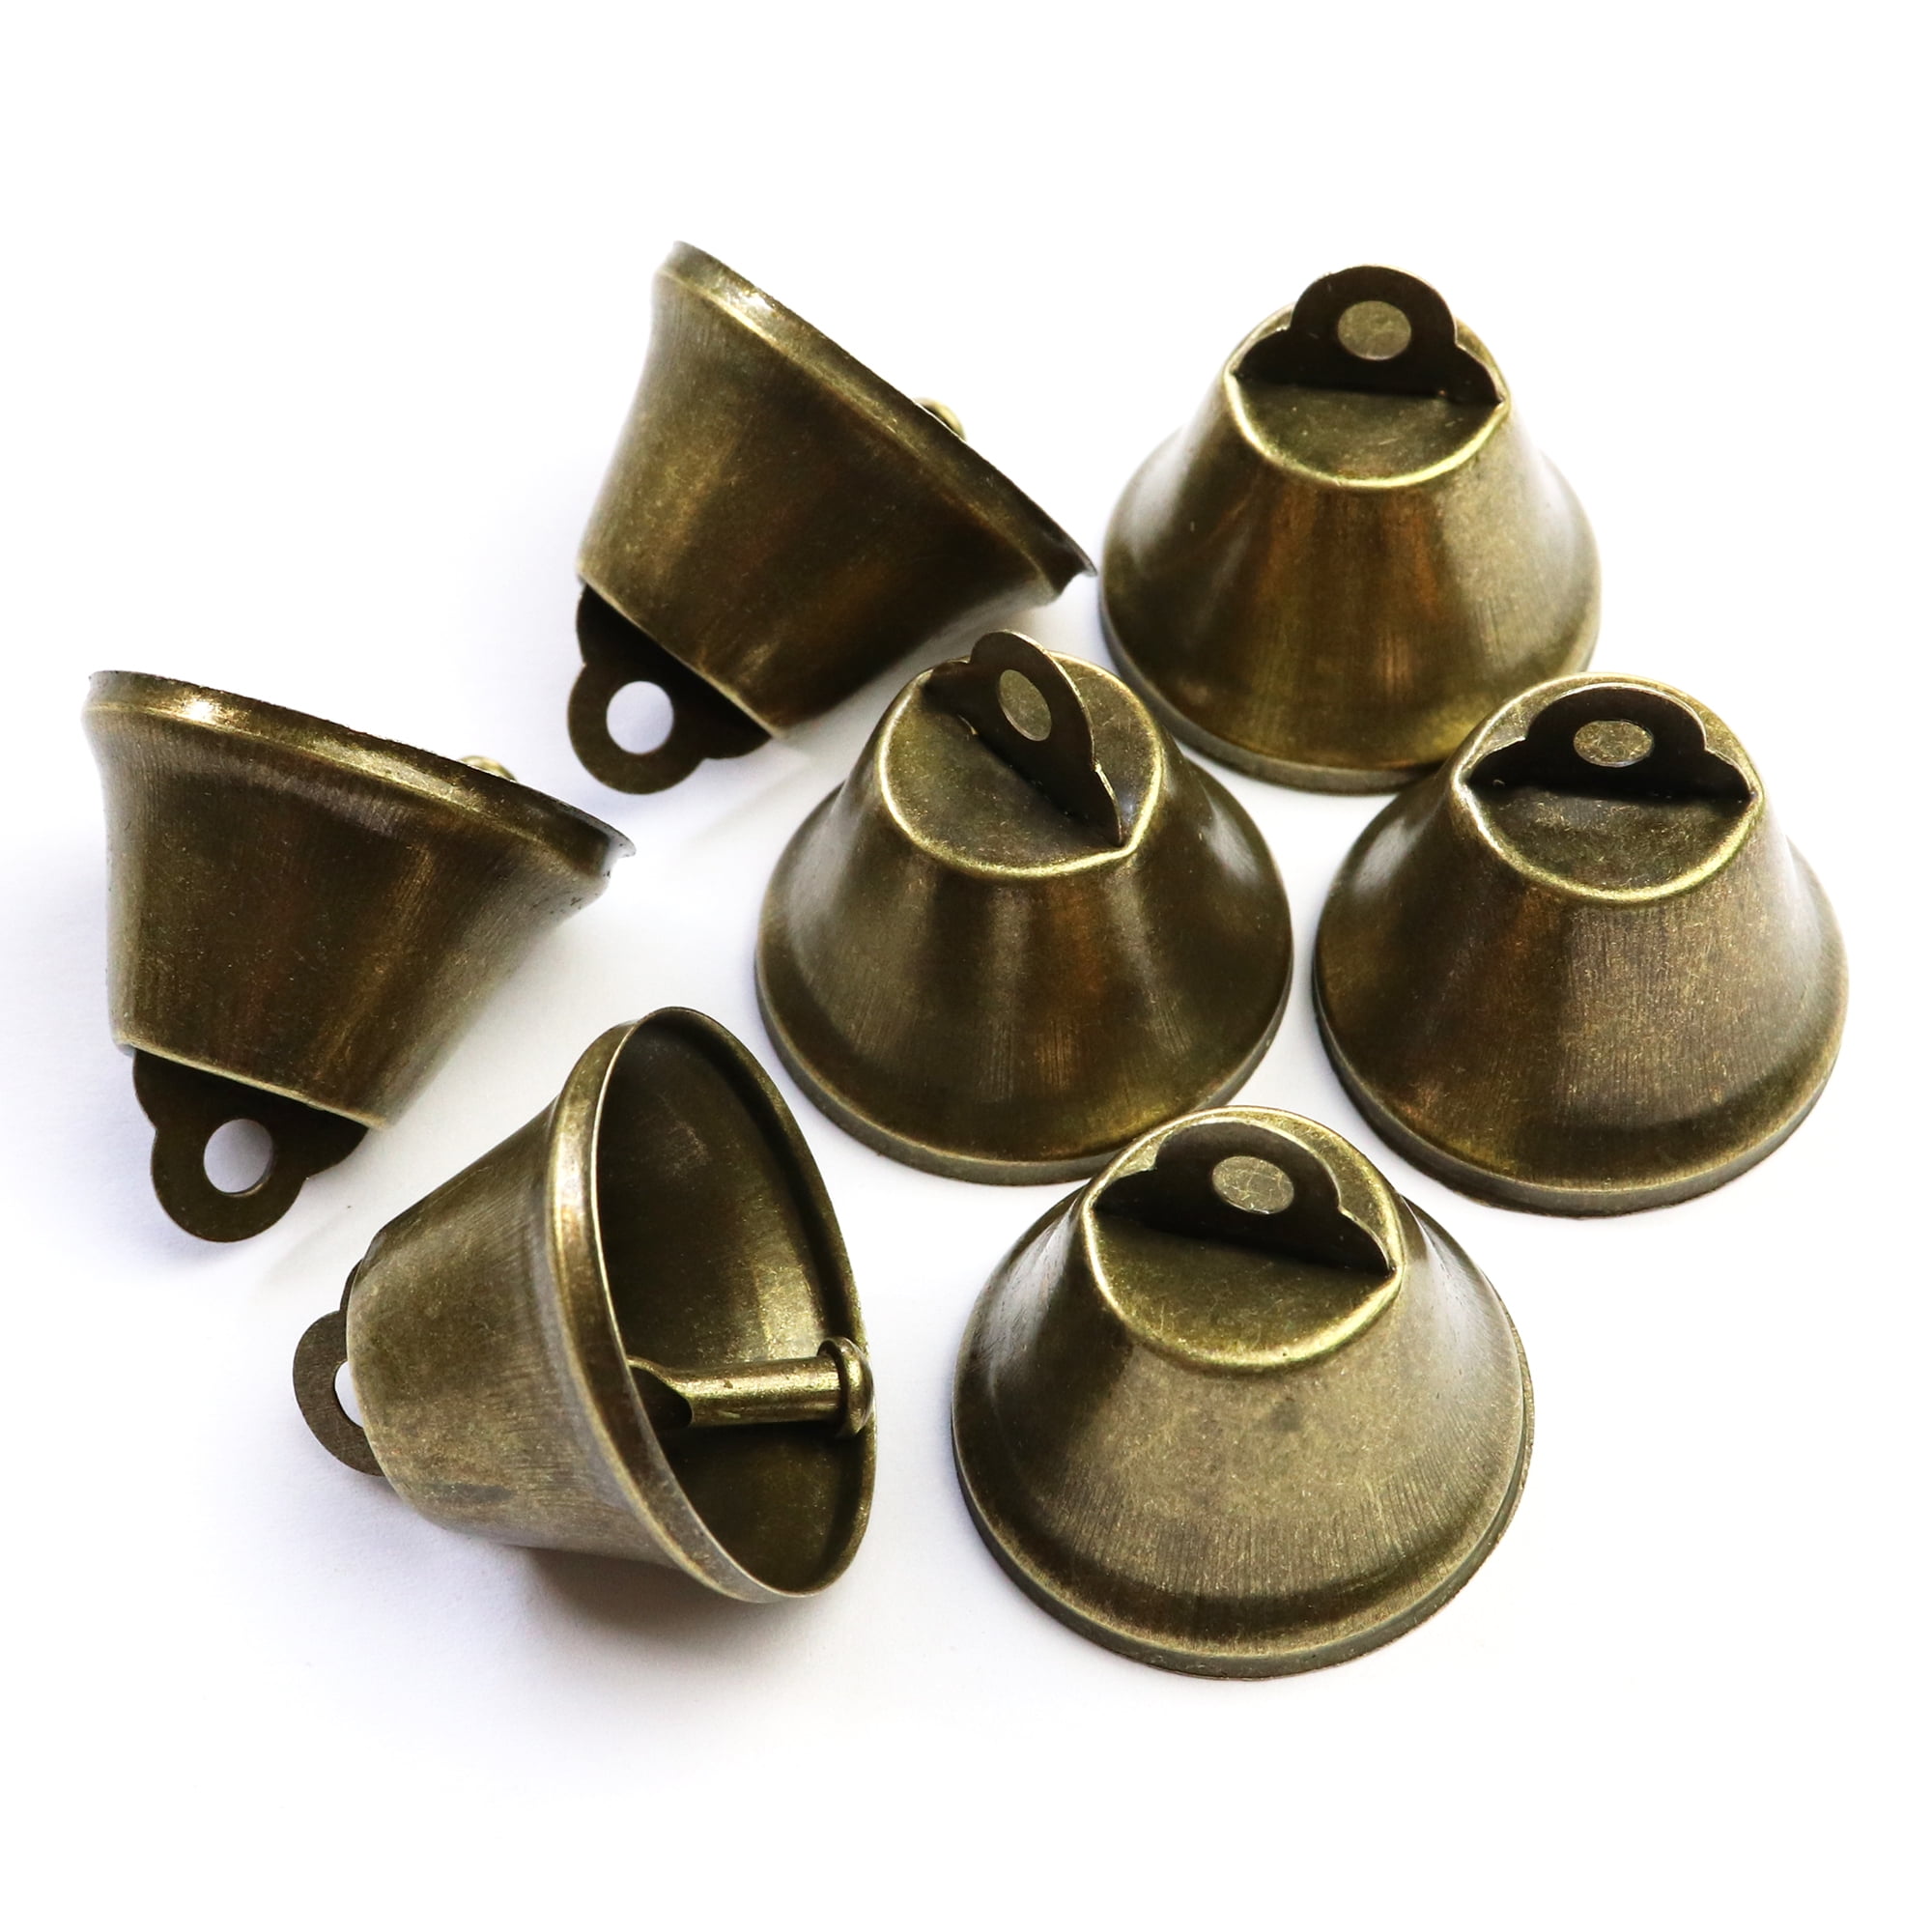 Vintage Bronze Jingle Bells Craft Bells 25mm / 1 inch for Dog Potty Training, Housebreaking, Wind Chimes, Christmas Bell (50 Pieces), Men's, Size: 25